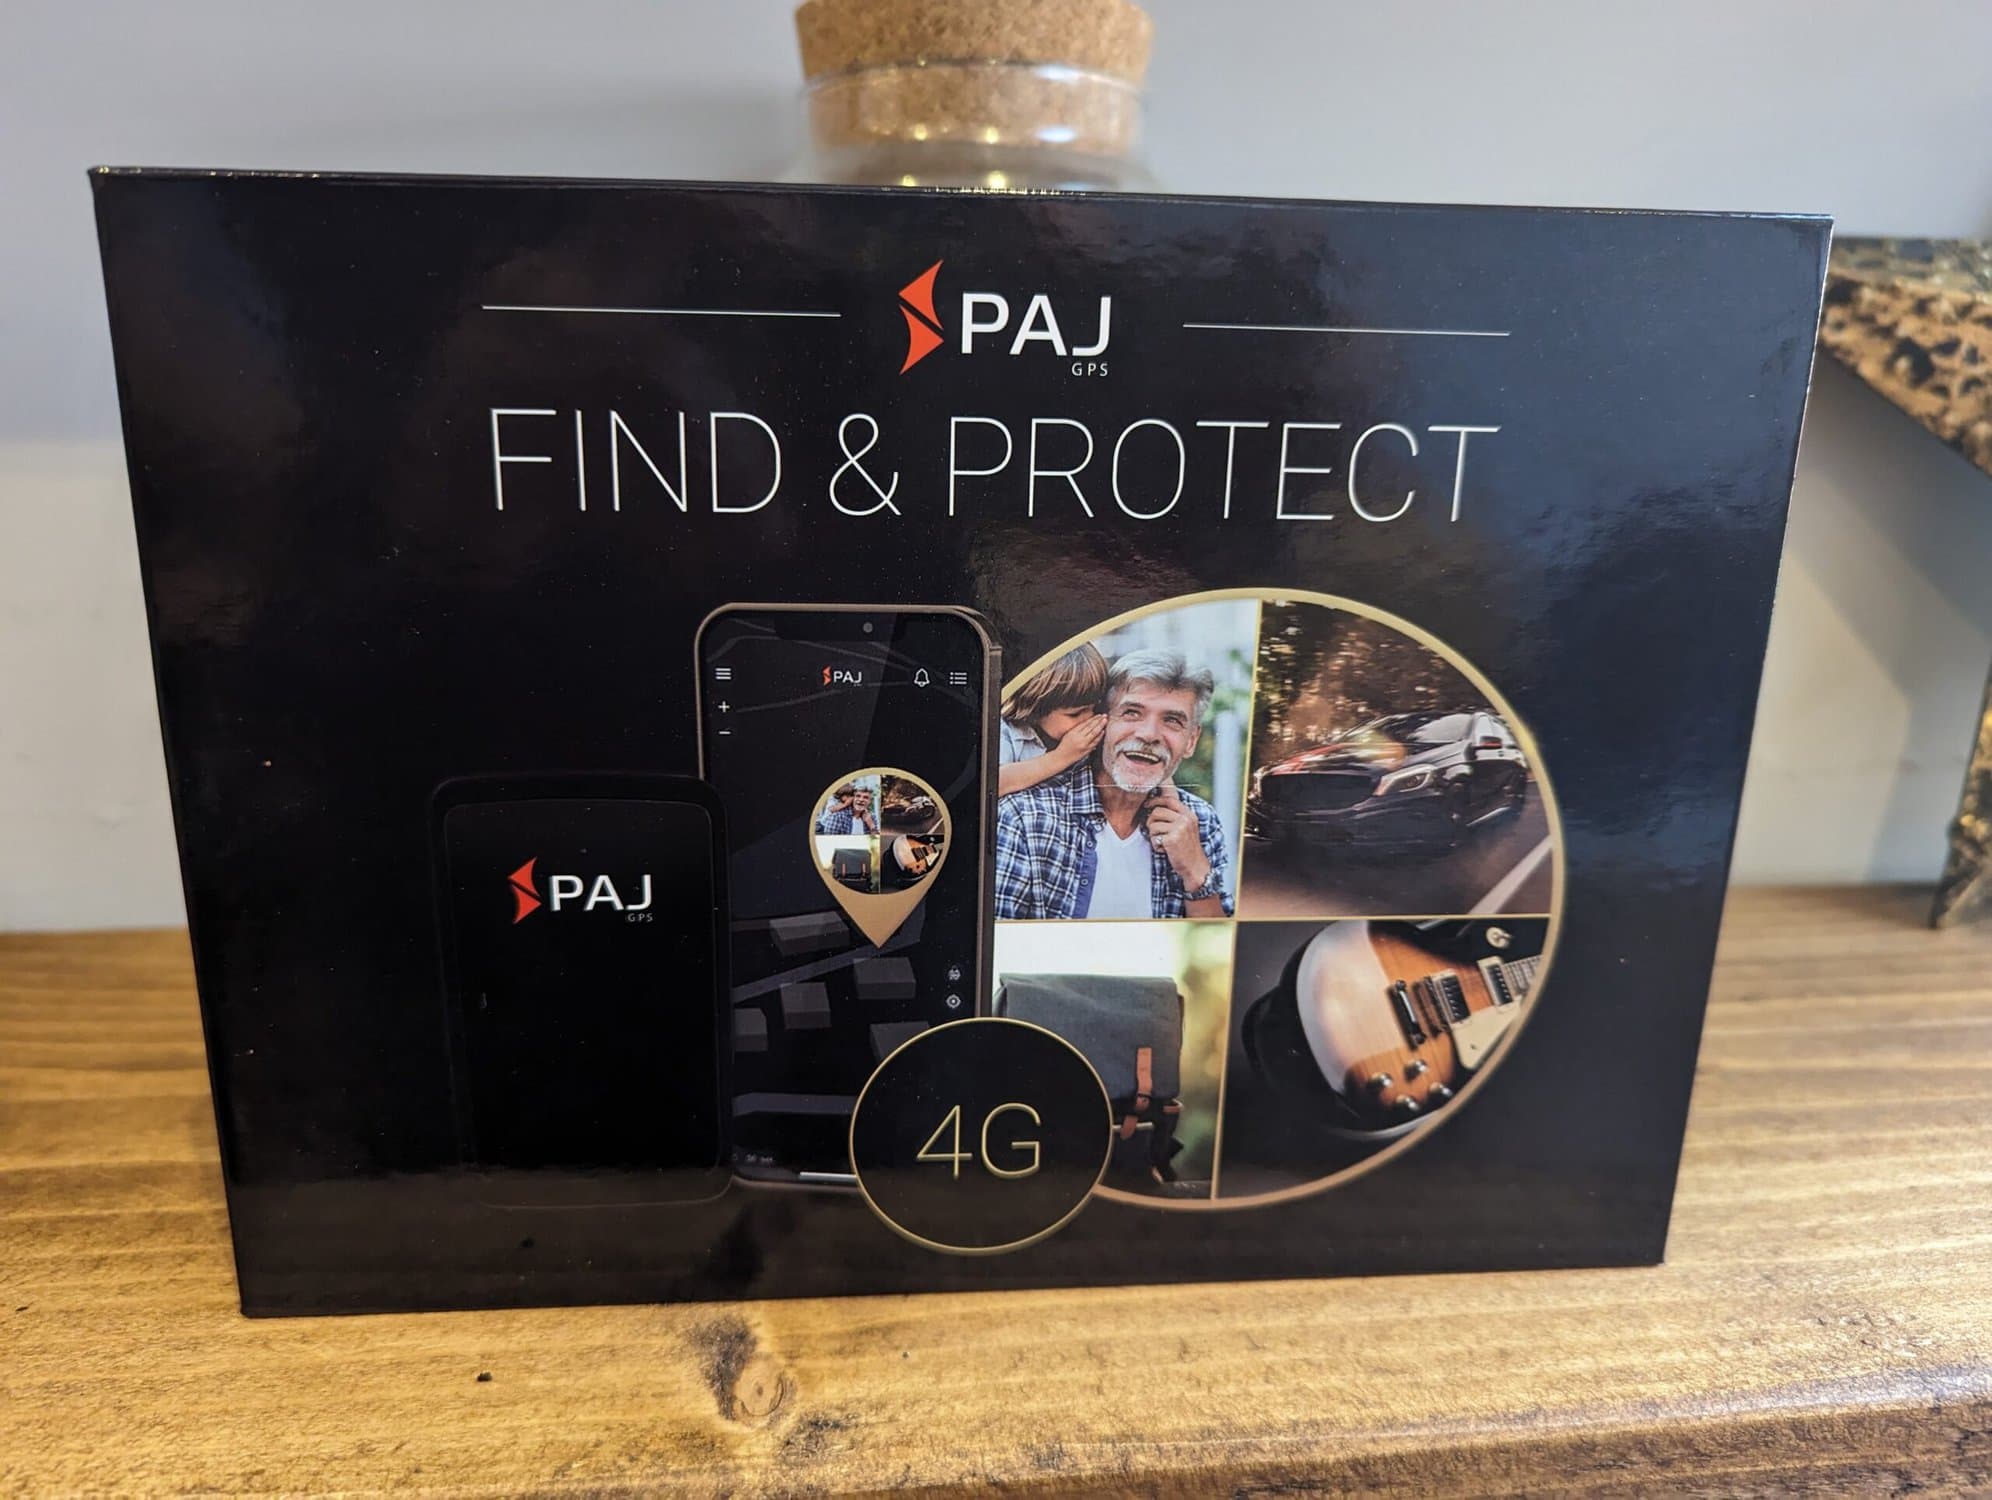 PAJ Allround Finder 4G GPS Tracker Review – Tracking Luggage with GPS vs Apple AirTag